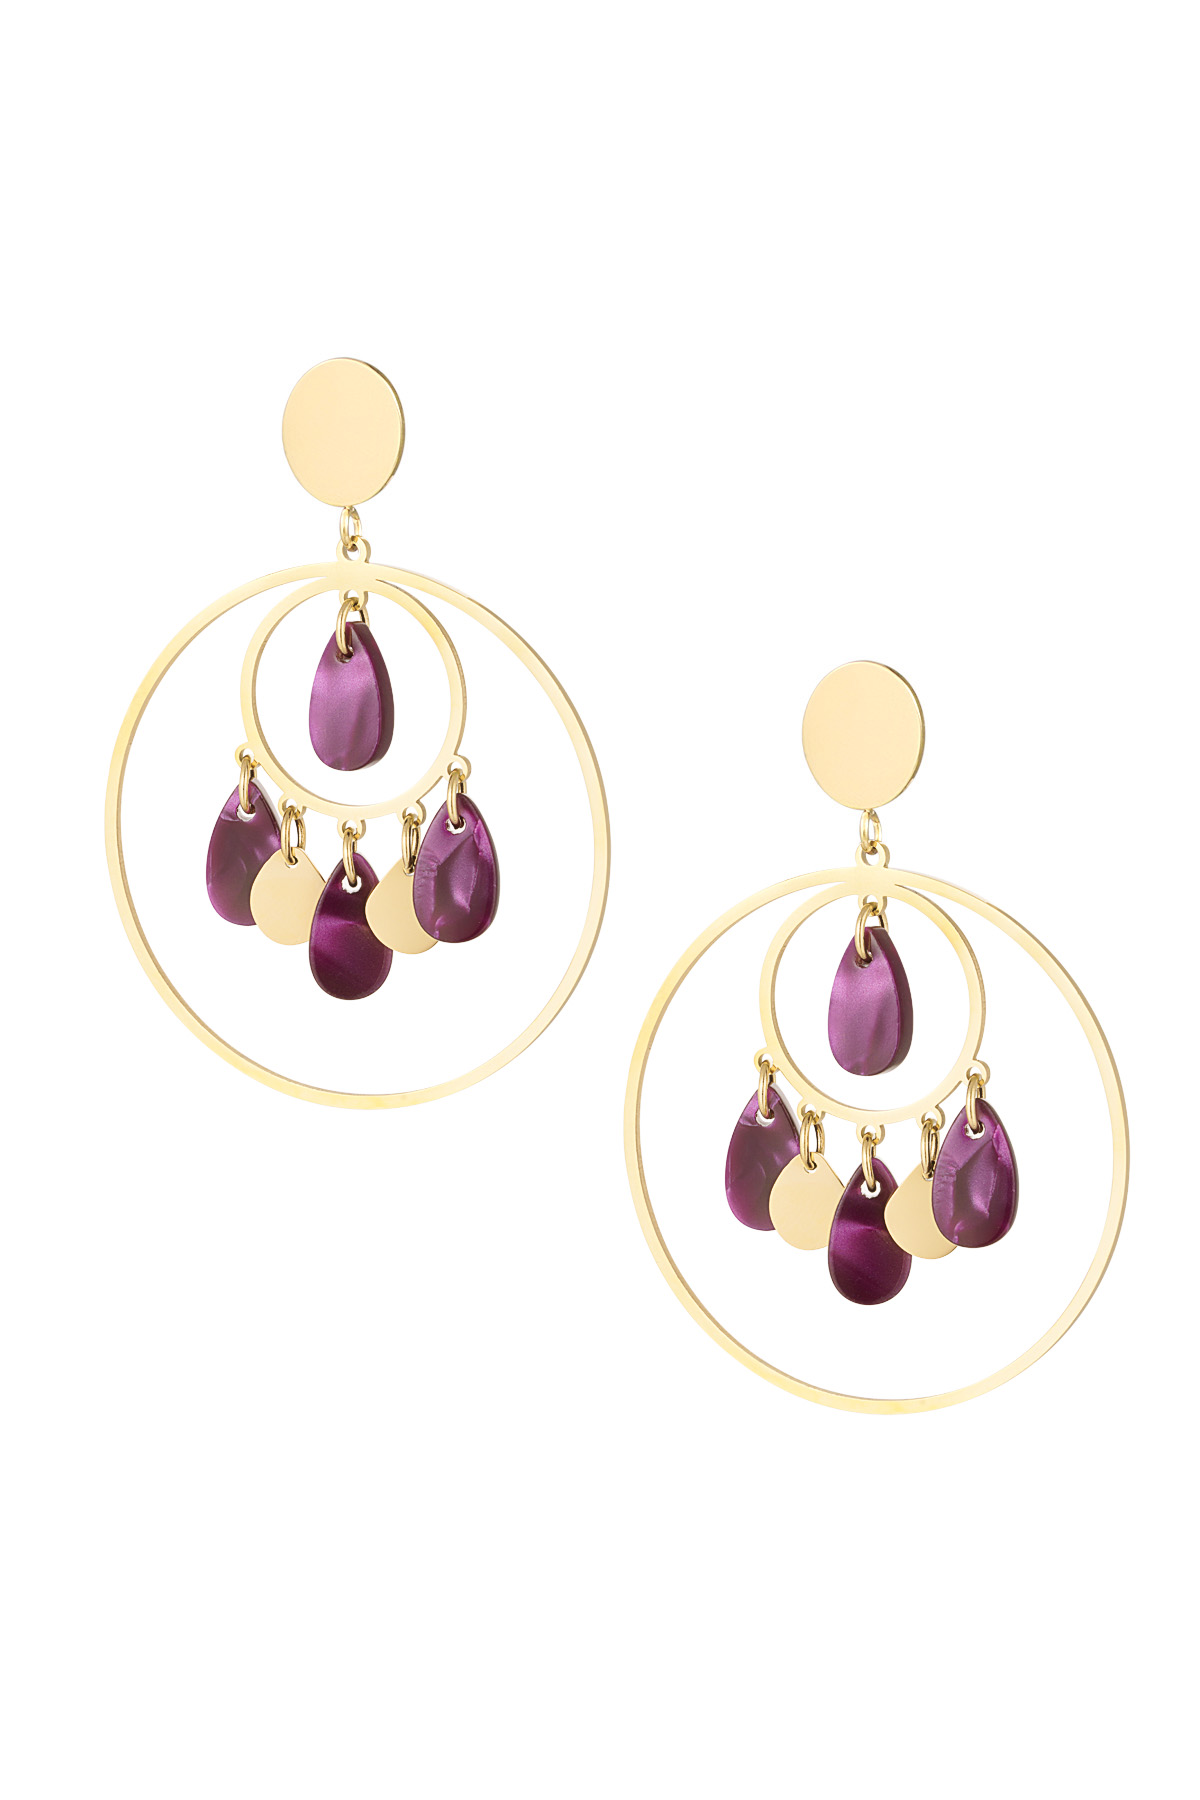 Earrings circles with coins - gold/purple h5 